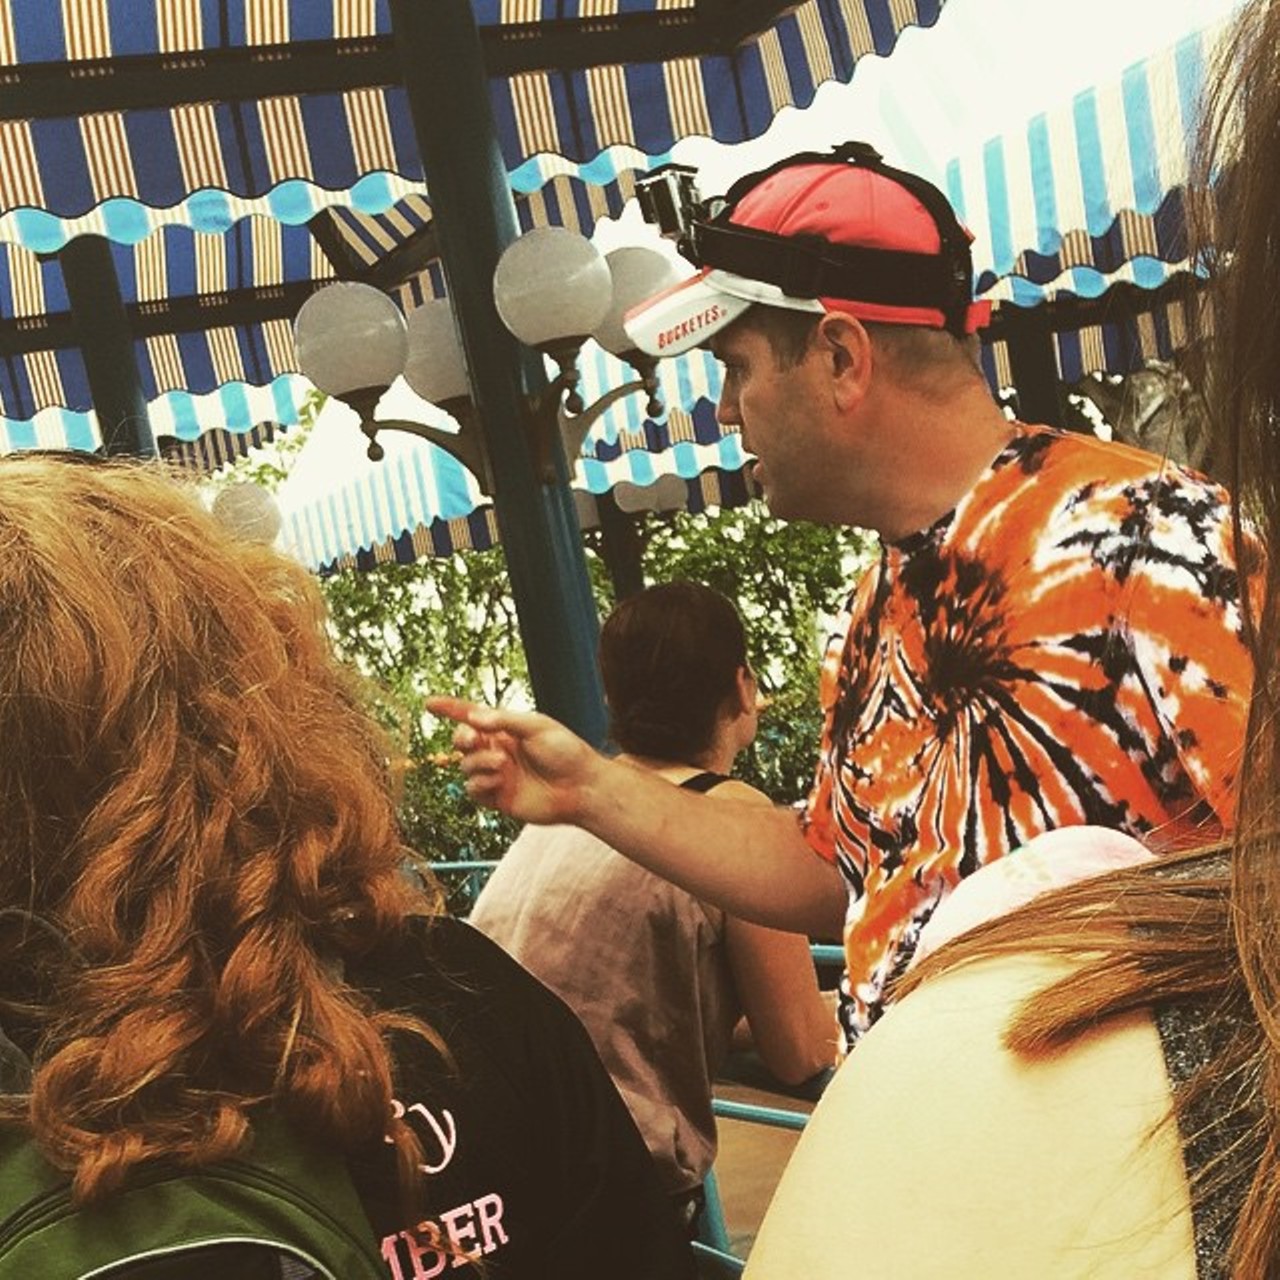  The Disney Dad 
This staple of Orlando doesn't mind waiting in line or strapping a GoPro to his head. He always has room in his fanny pack, and his cargo shorts are a bottomless cavern of granola bars, room keys and receipts. But most importantly, he always has a designated meeting place in case everyone gets split up. 
Photo via Instagram user xdanielxsdx